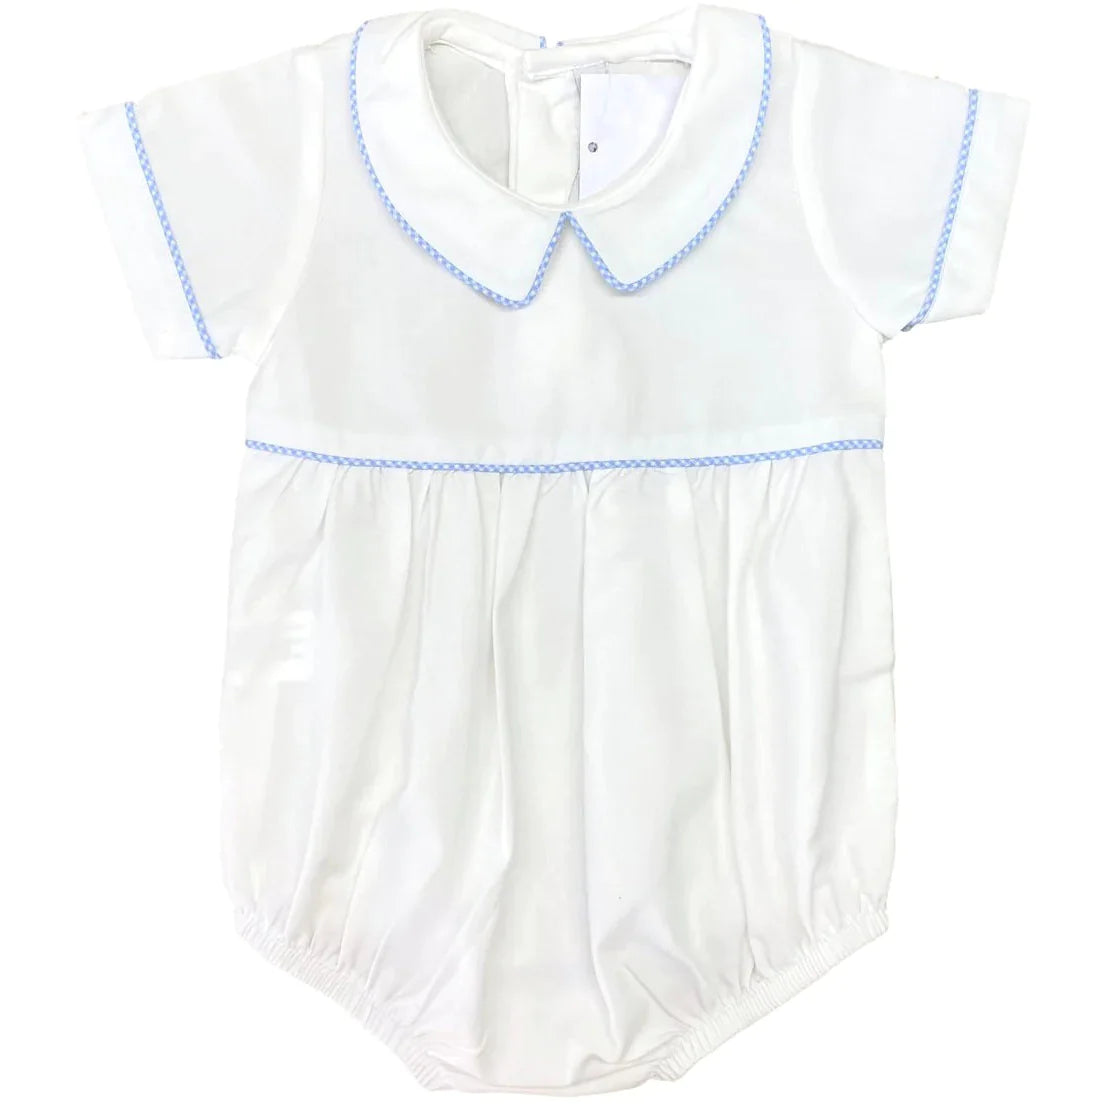 White Bubble with Blue Gingham includes name or monogram